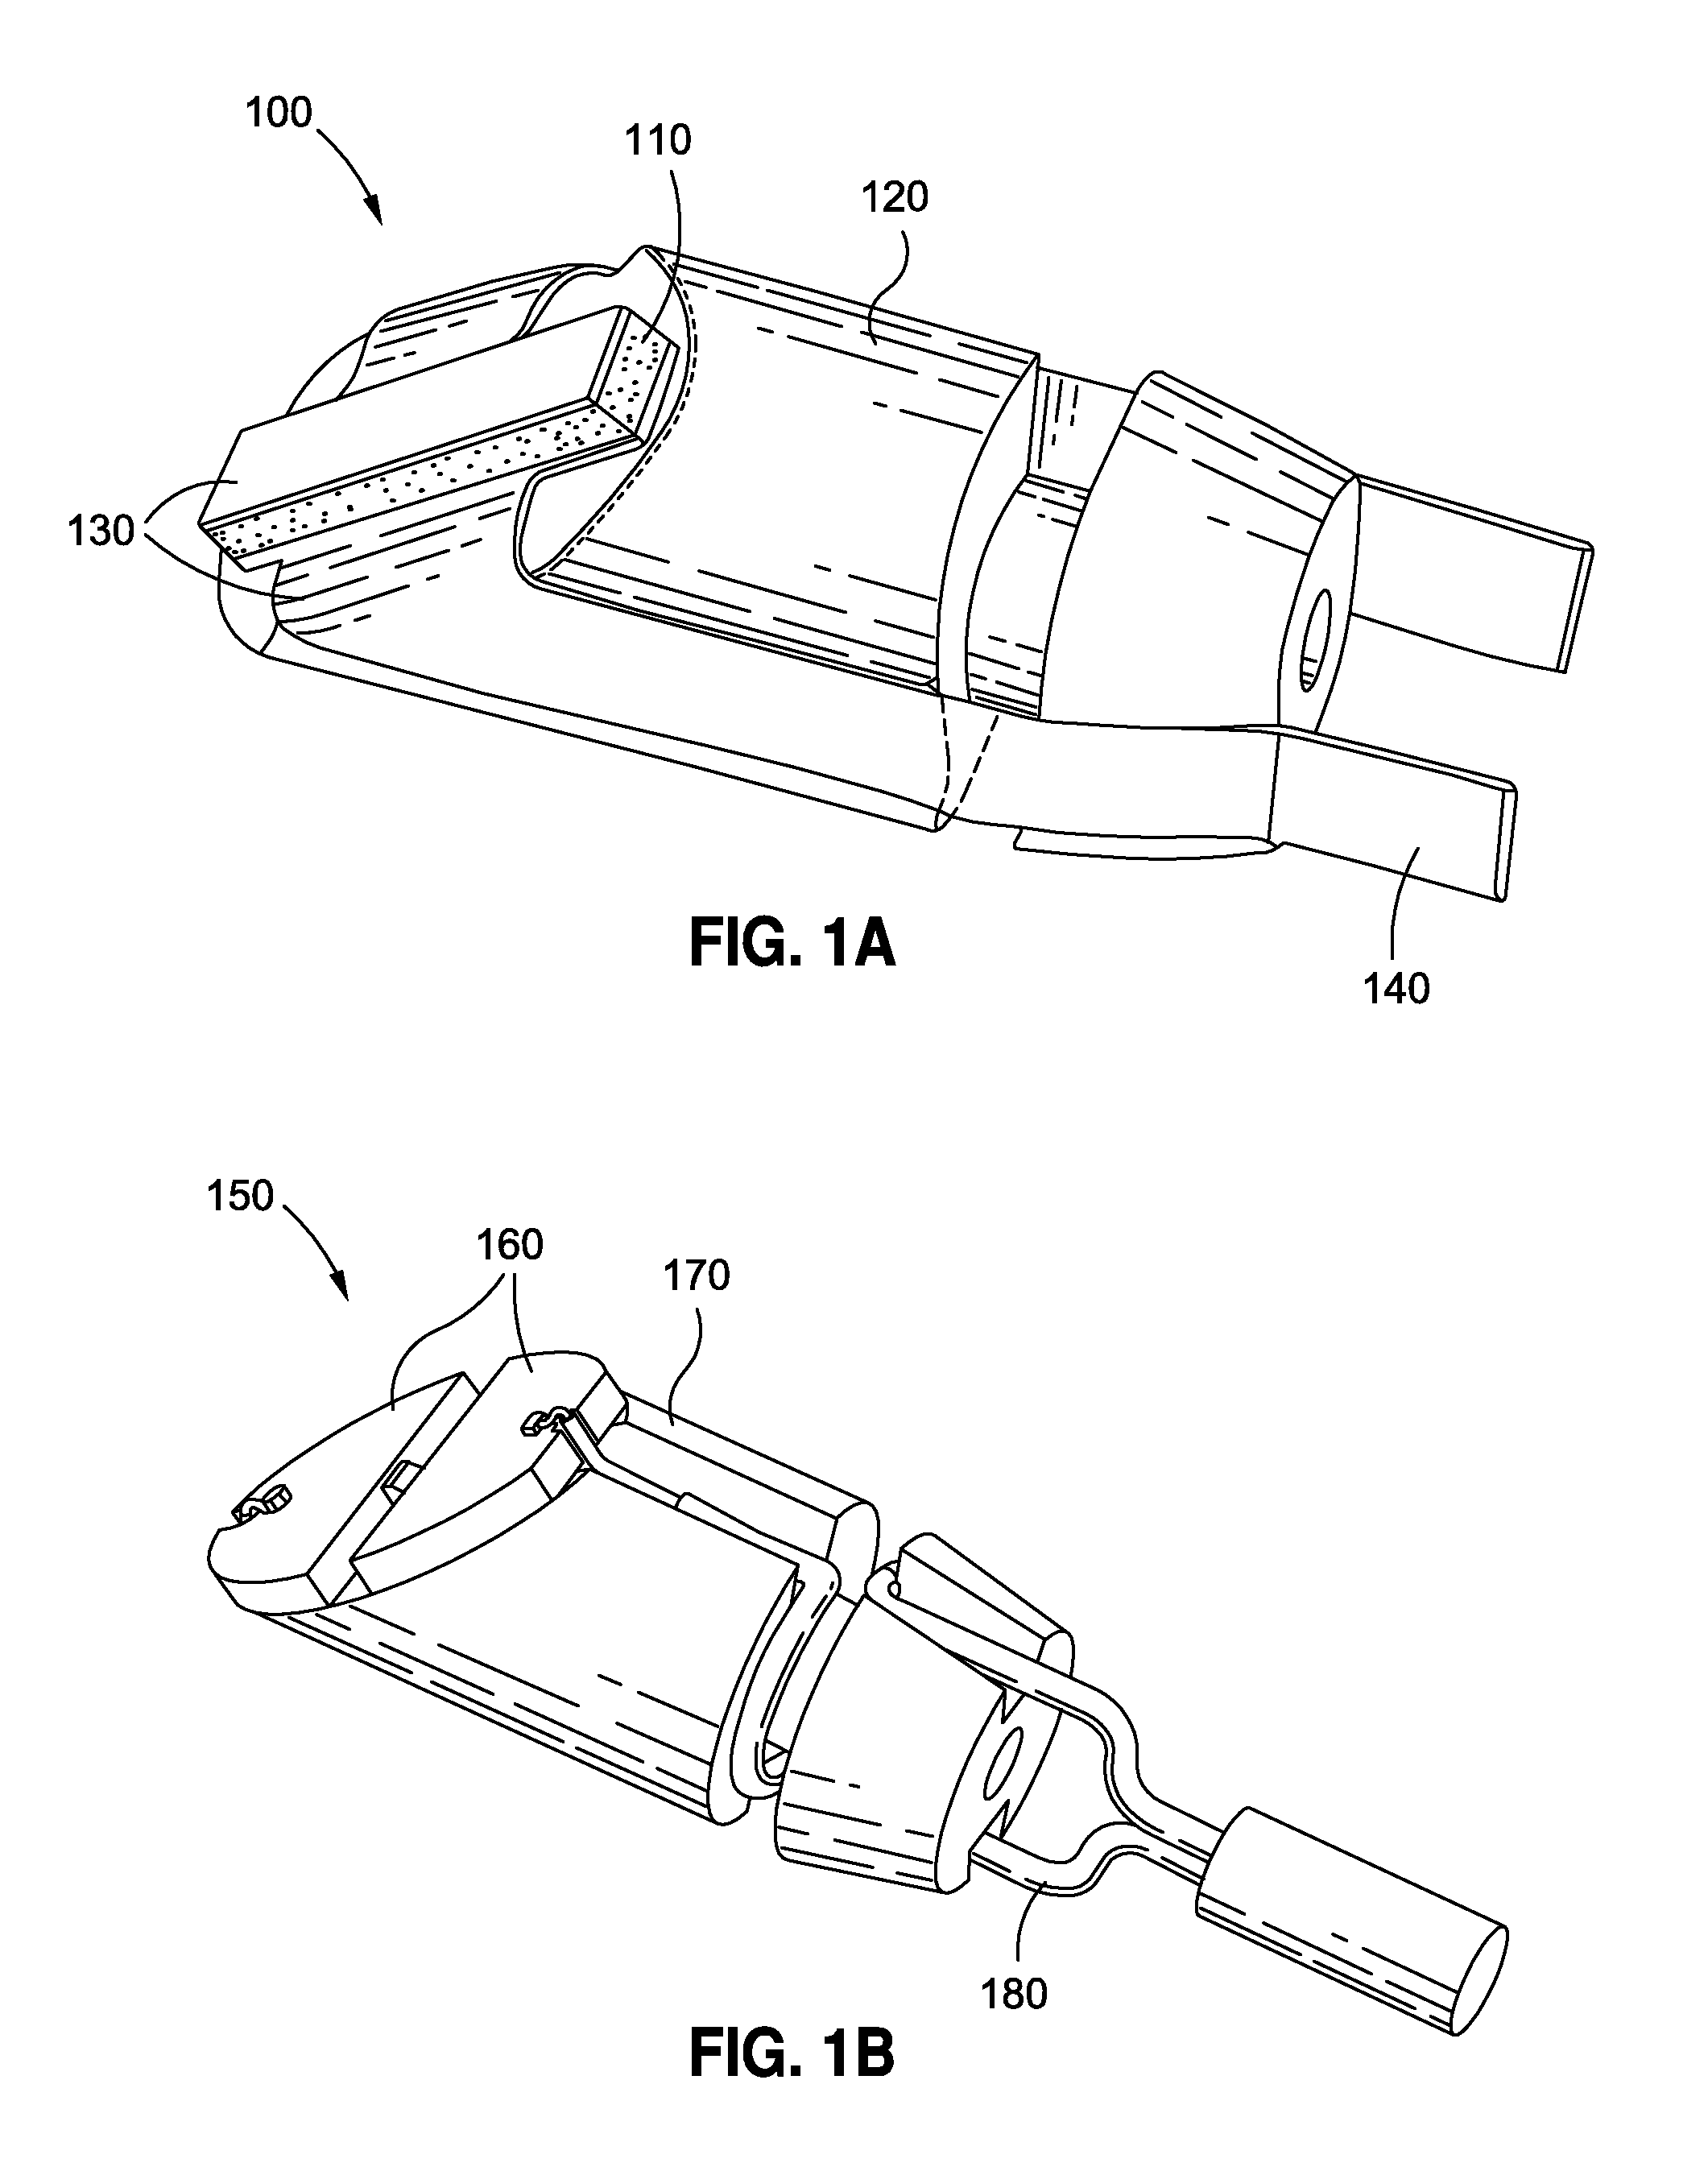 Method and Apparatus for Hemodynamic Monitoring Using Combined Blood Flow and Blood Pressure Measurement